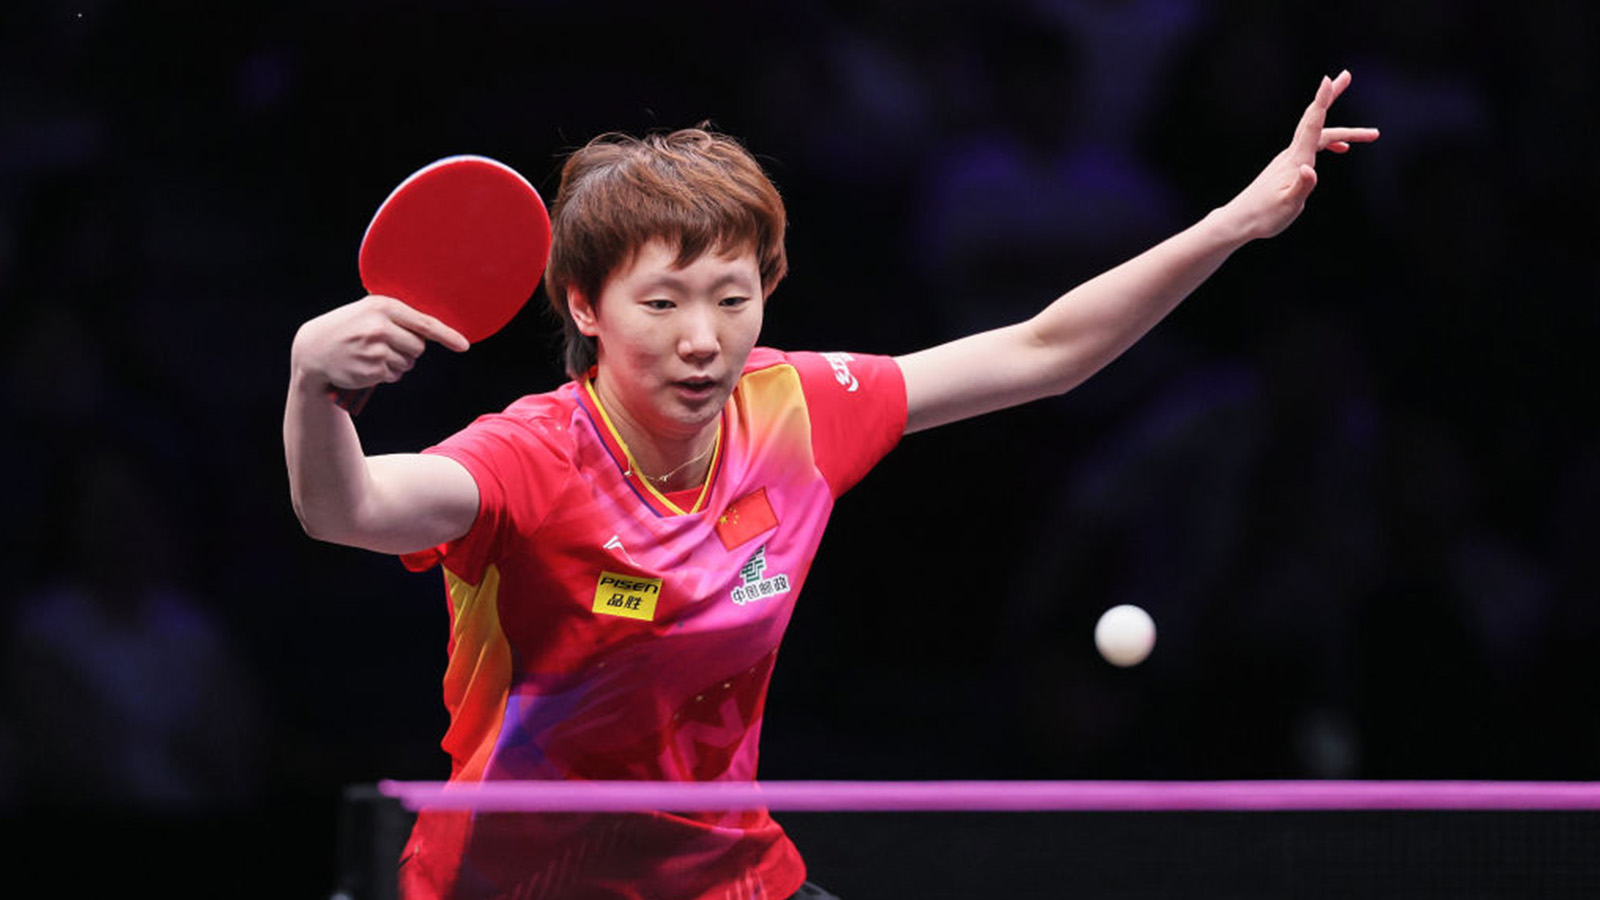 Chinese Table Tennis Controversy Sparks Olympics Protest Threat [Video]